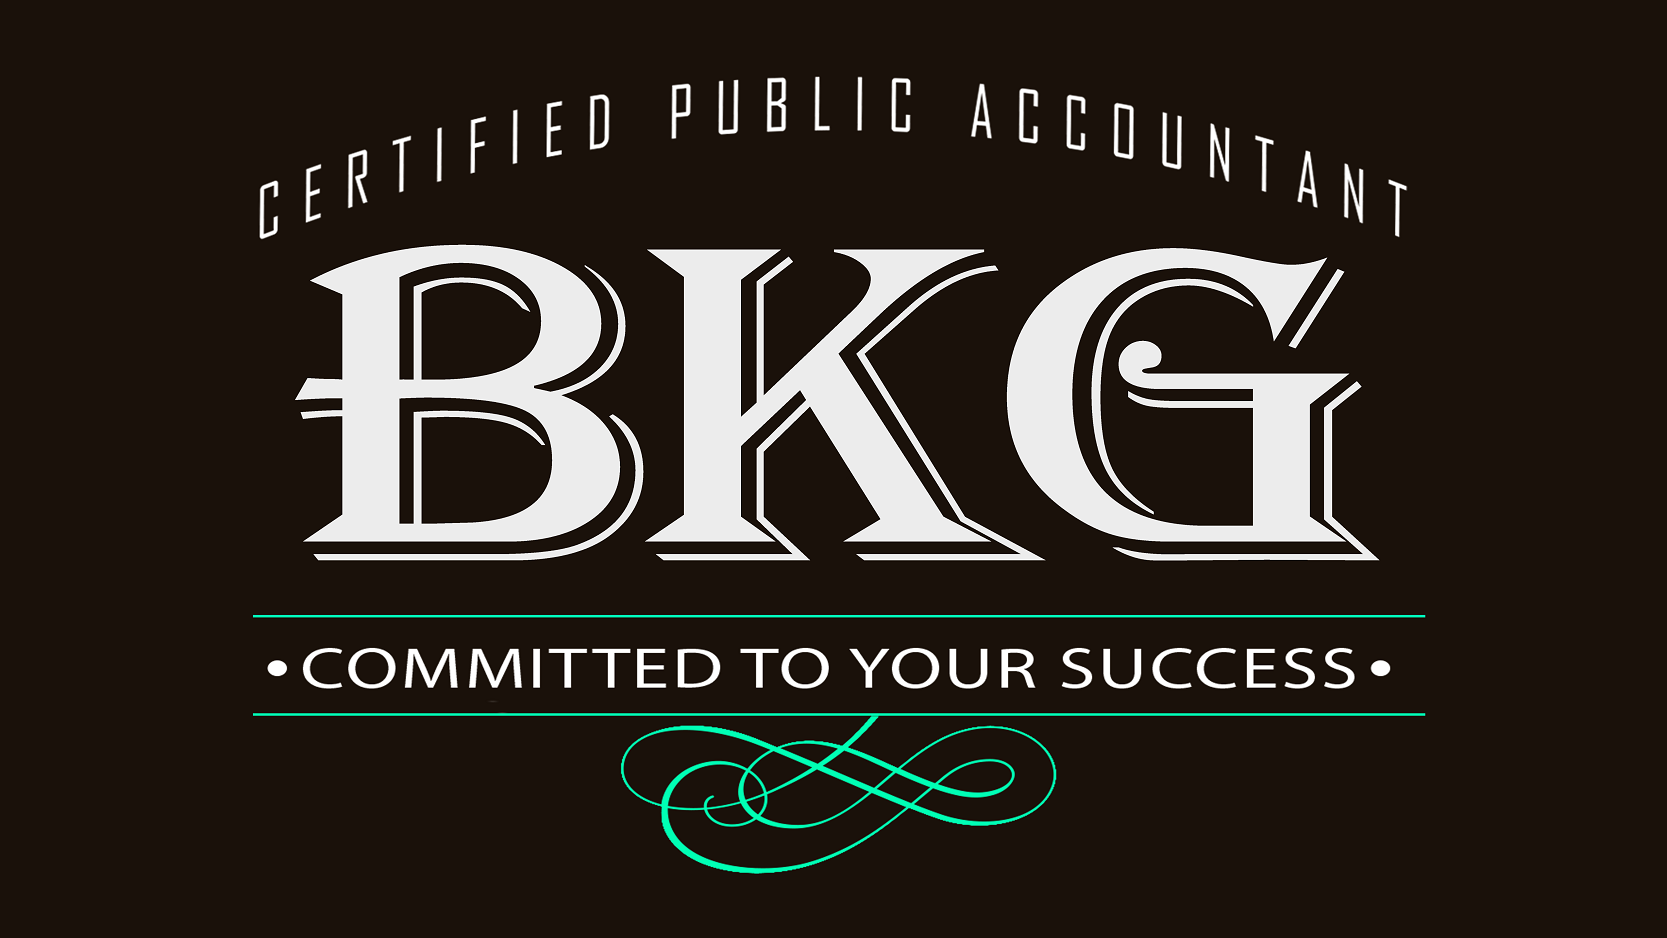 BKG Accounting & Tax Services